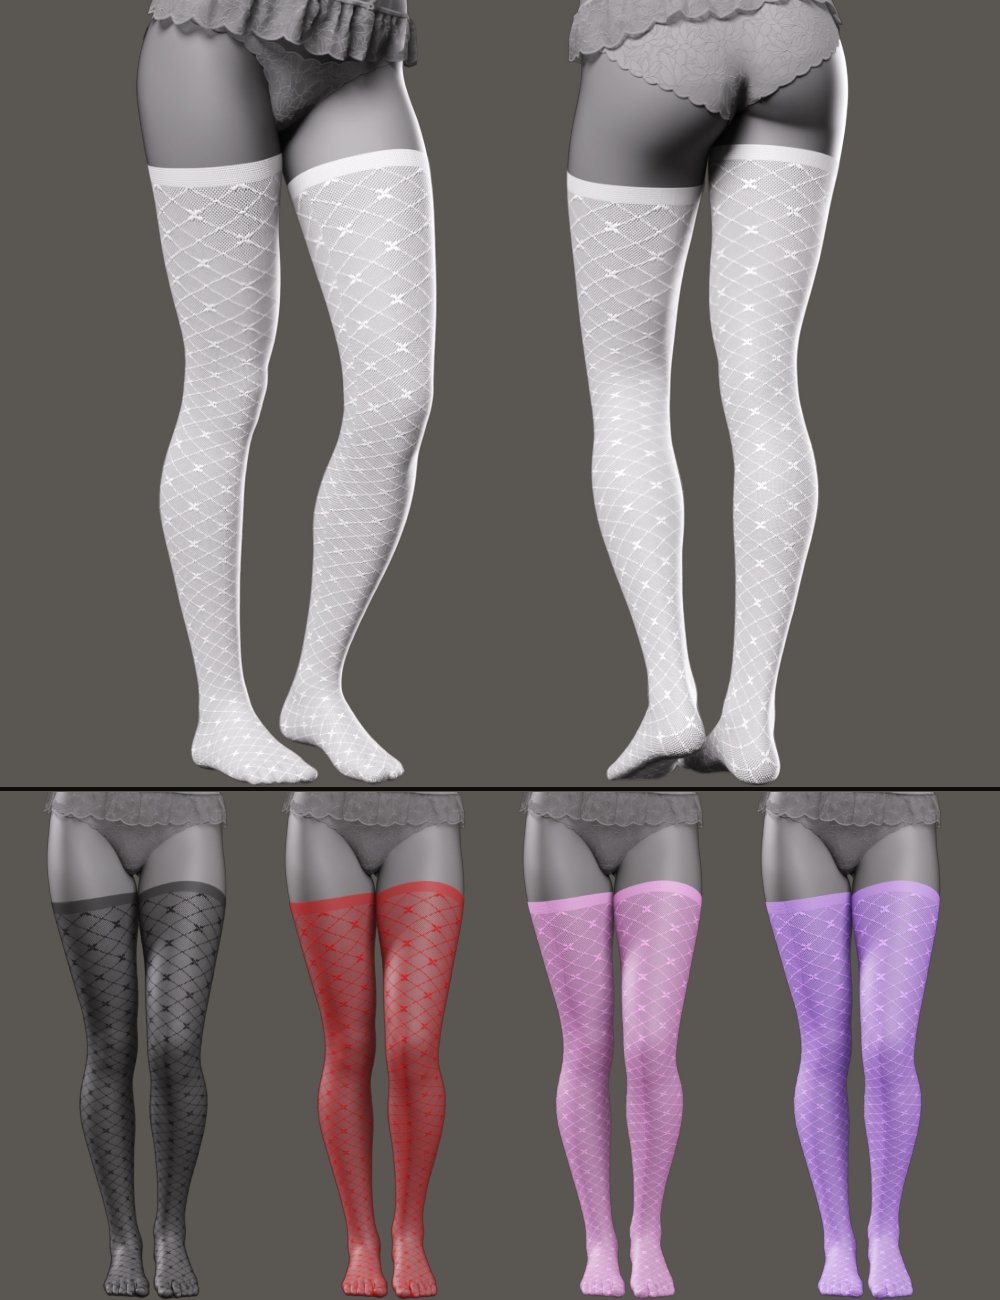 CNB Lace Stockings for Genesis 8 and 8.1 Females by: Cinnabar, 3D Models by Daz 3D